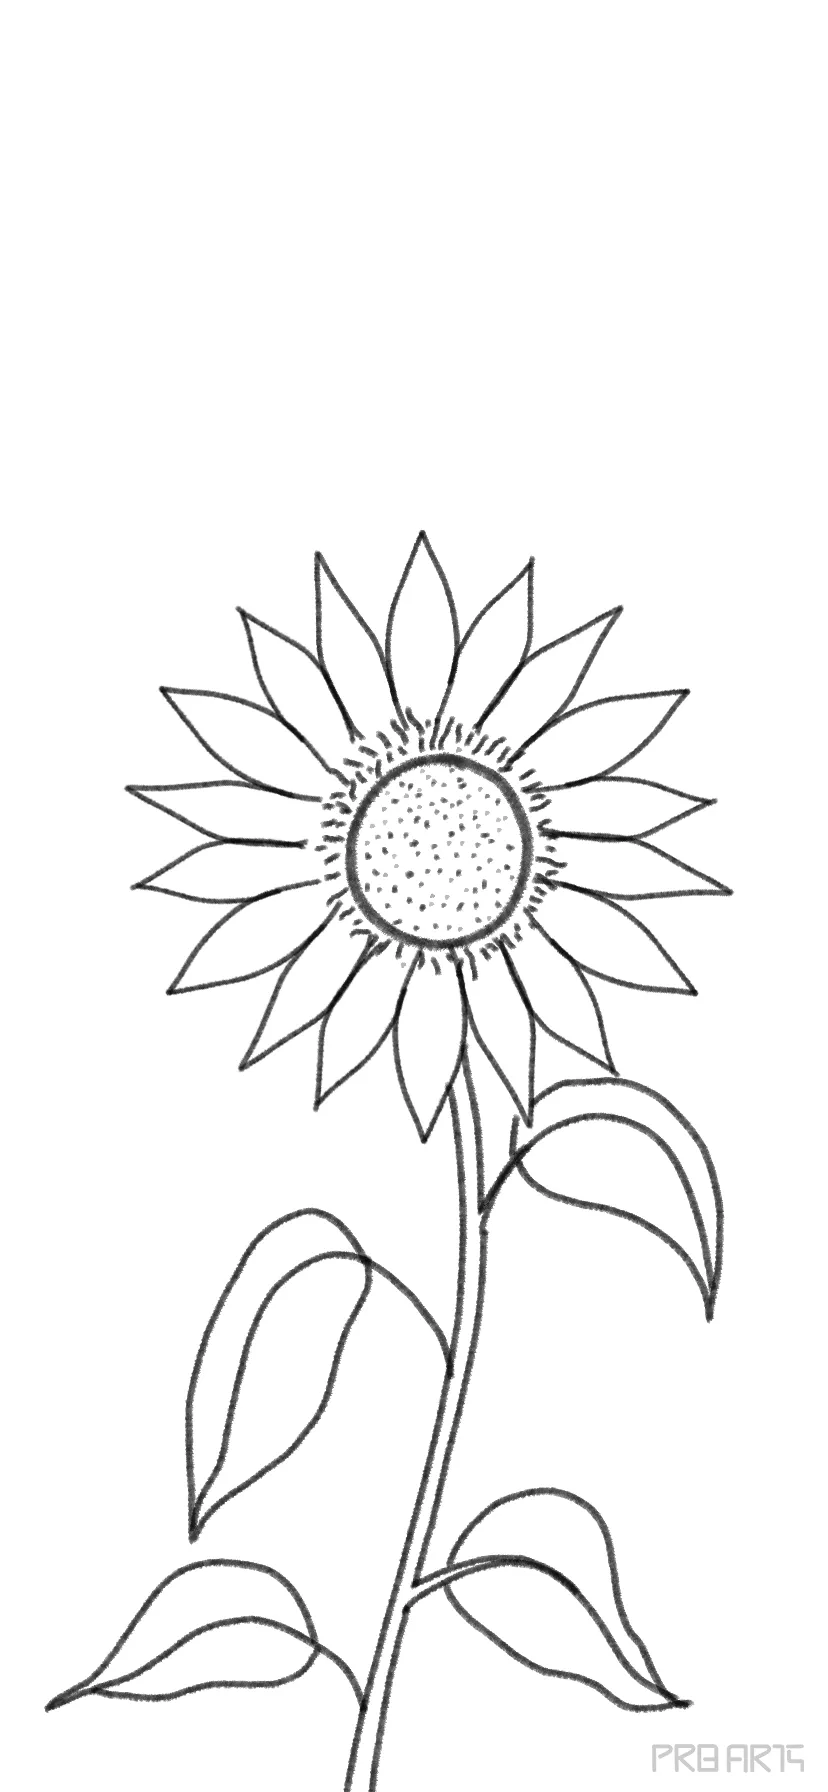 Buy Sunflower SVG Hand Drawn Line Drawing Commercial Use Online in India   Etsy